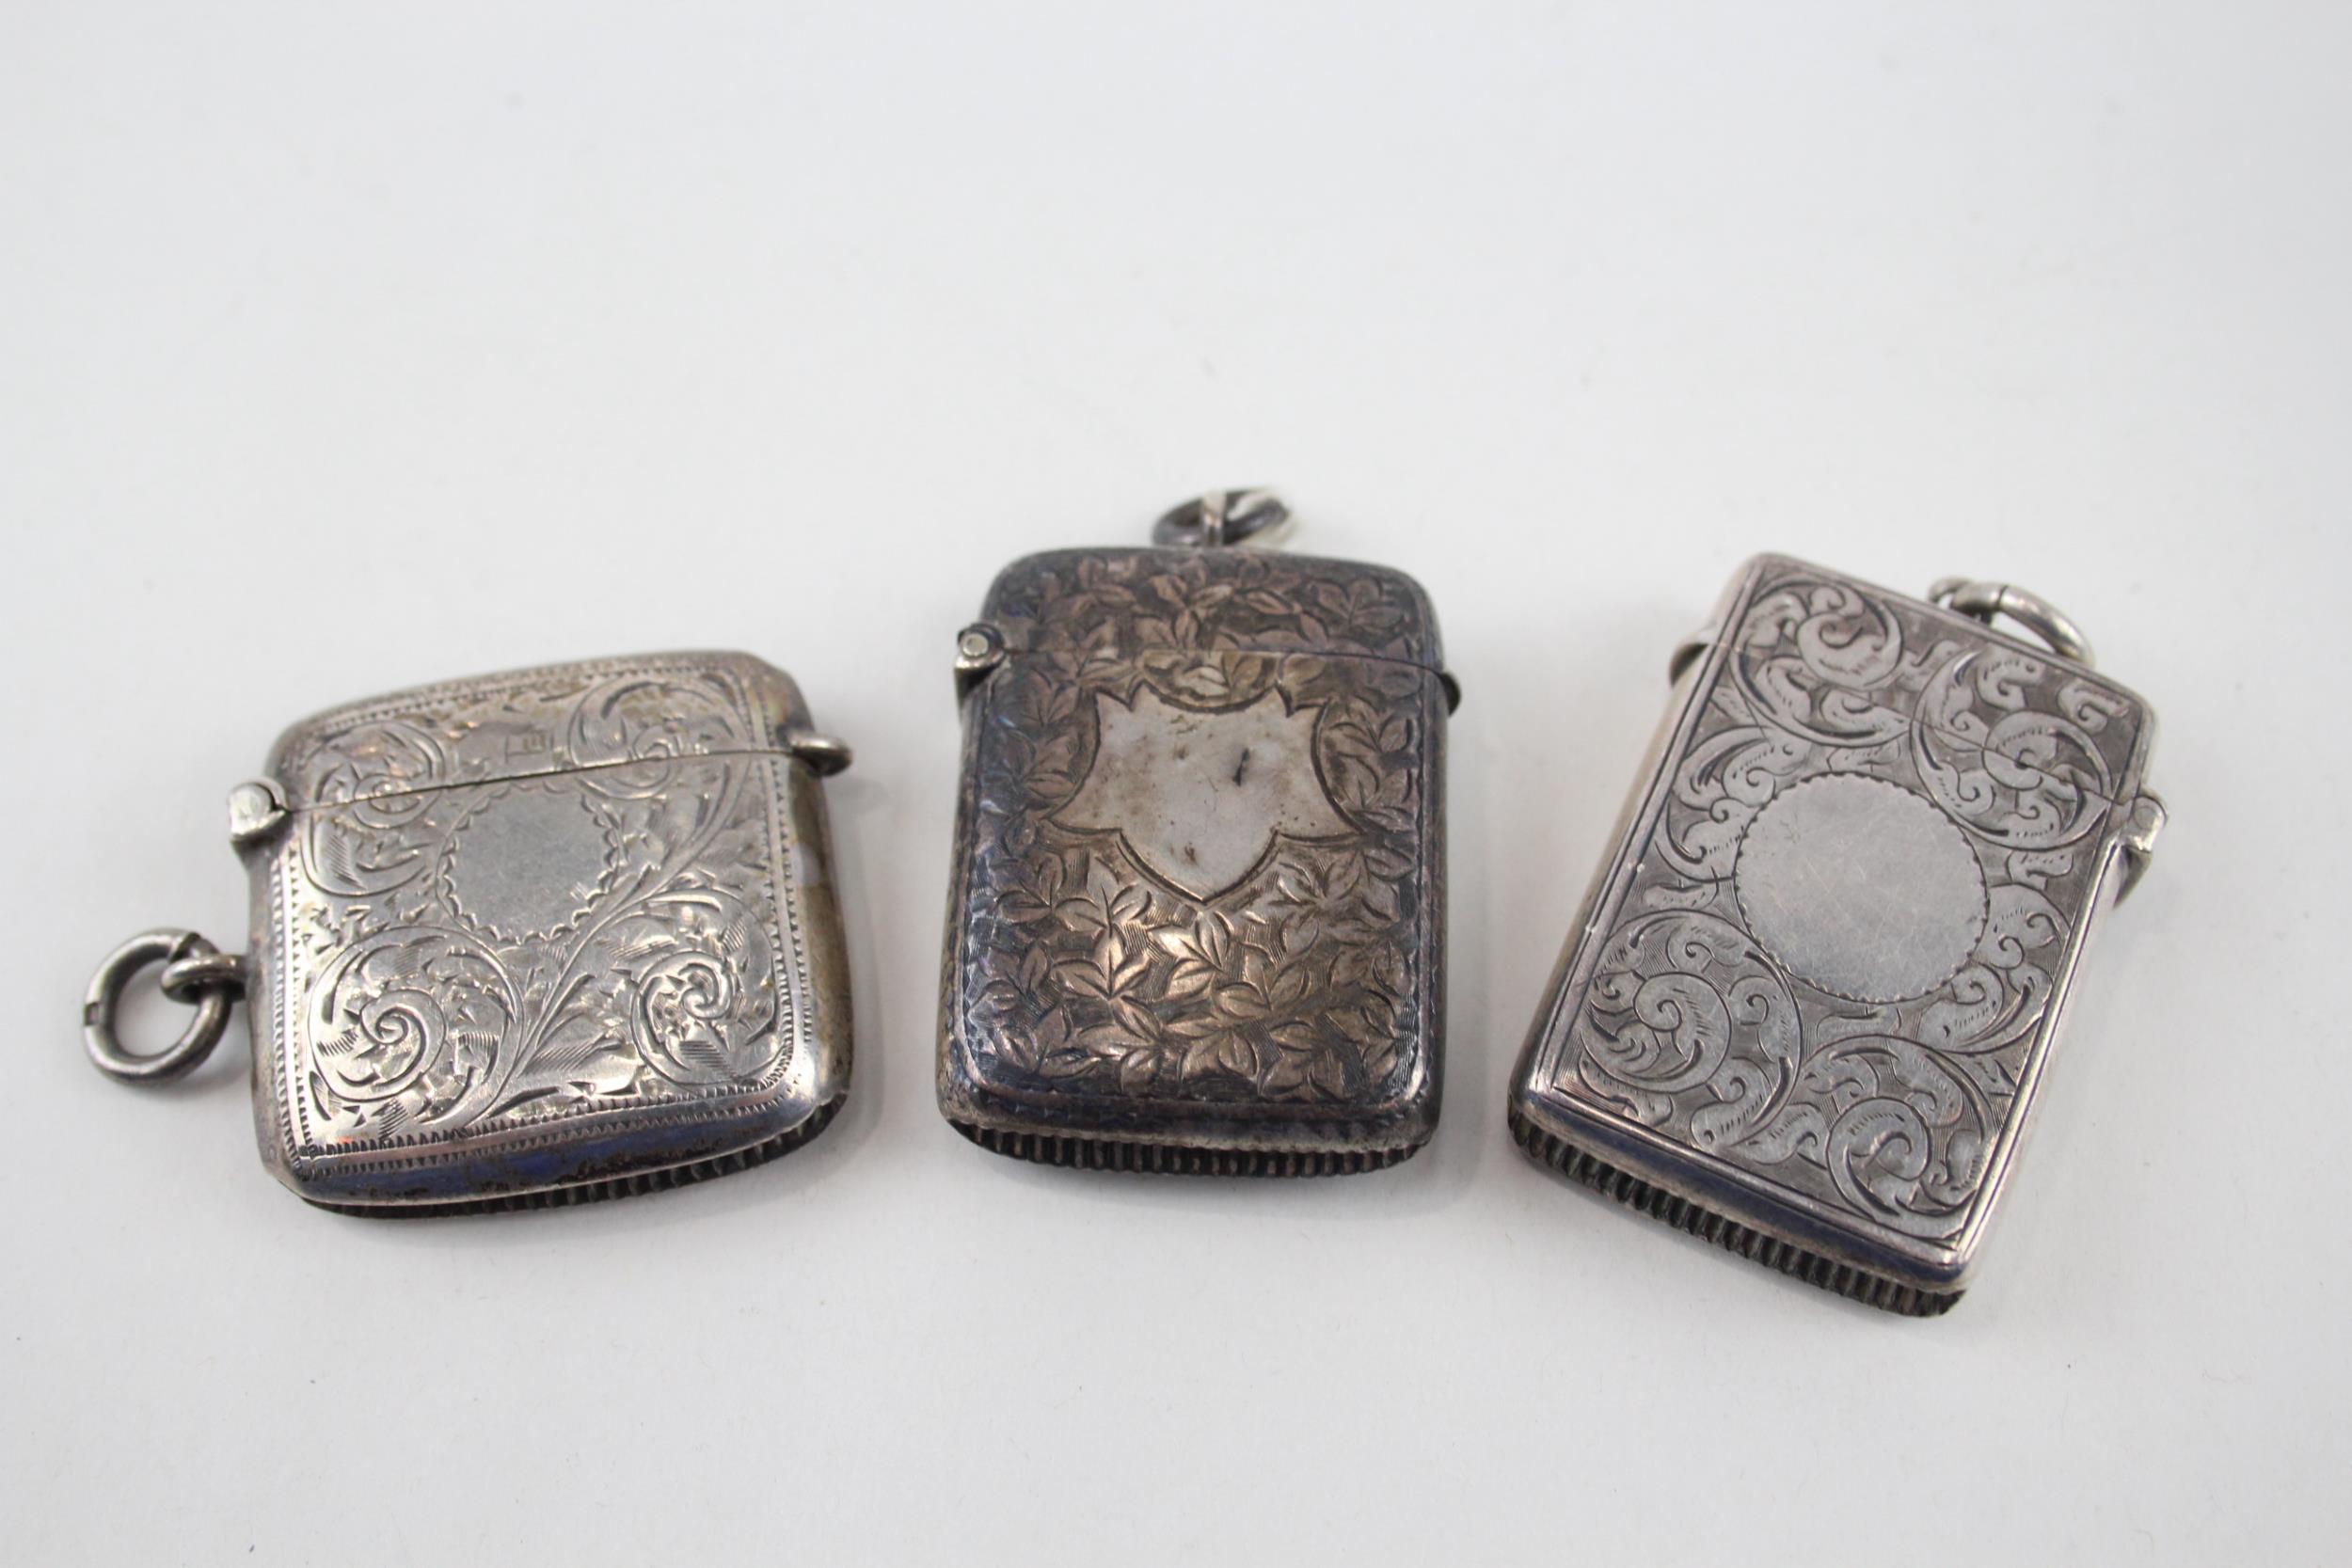 3 x Antique .925 Sterling Silver Vesta / Match Cases Inc Victorian (65g) - In antique condition